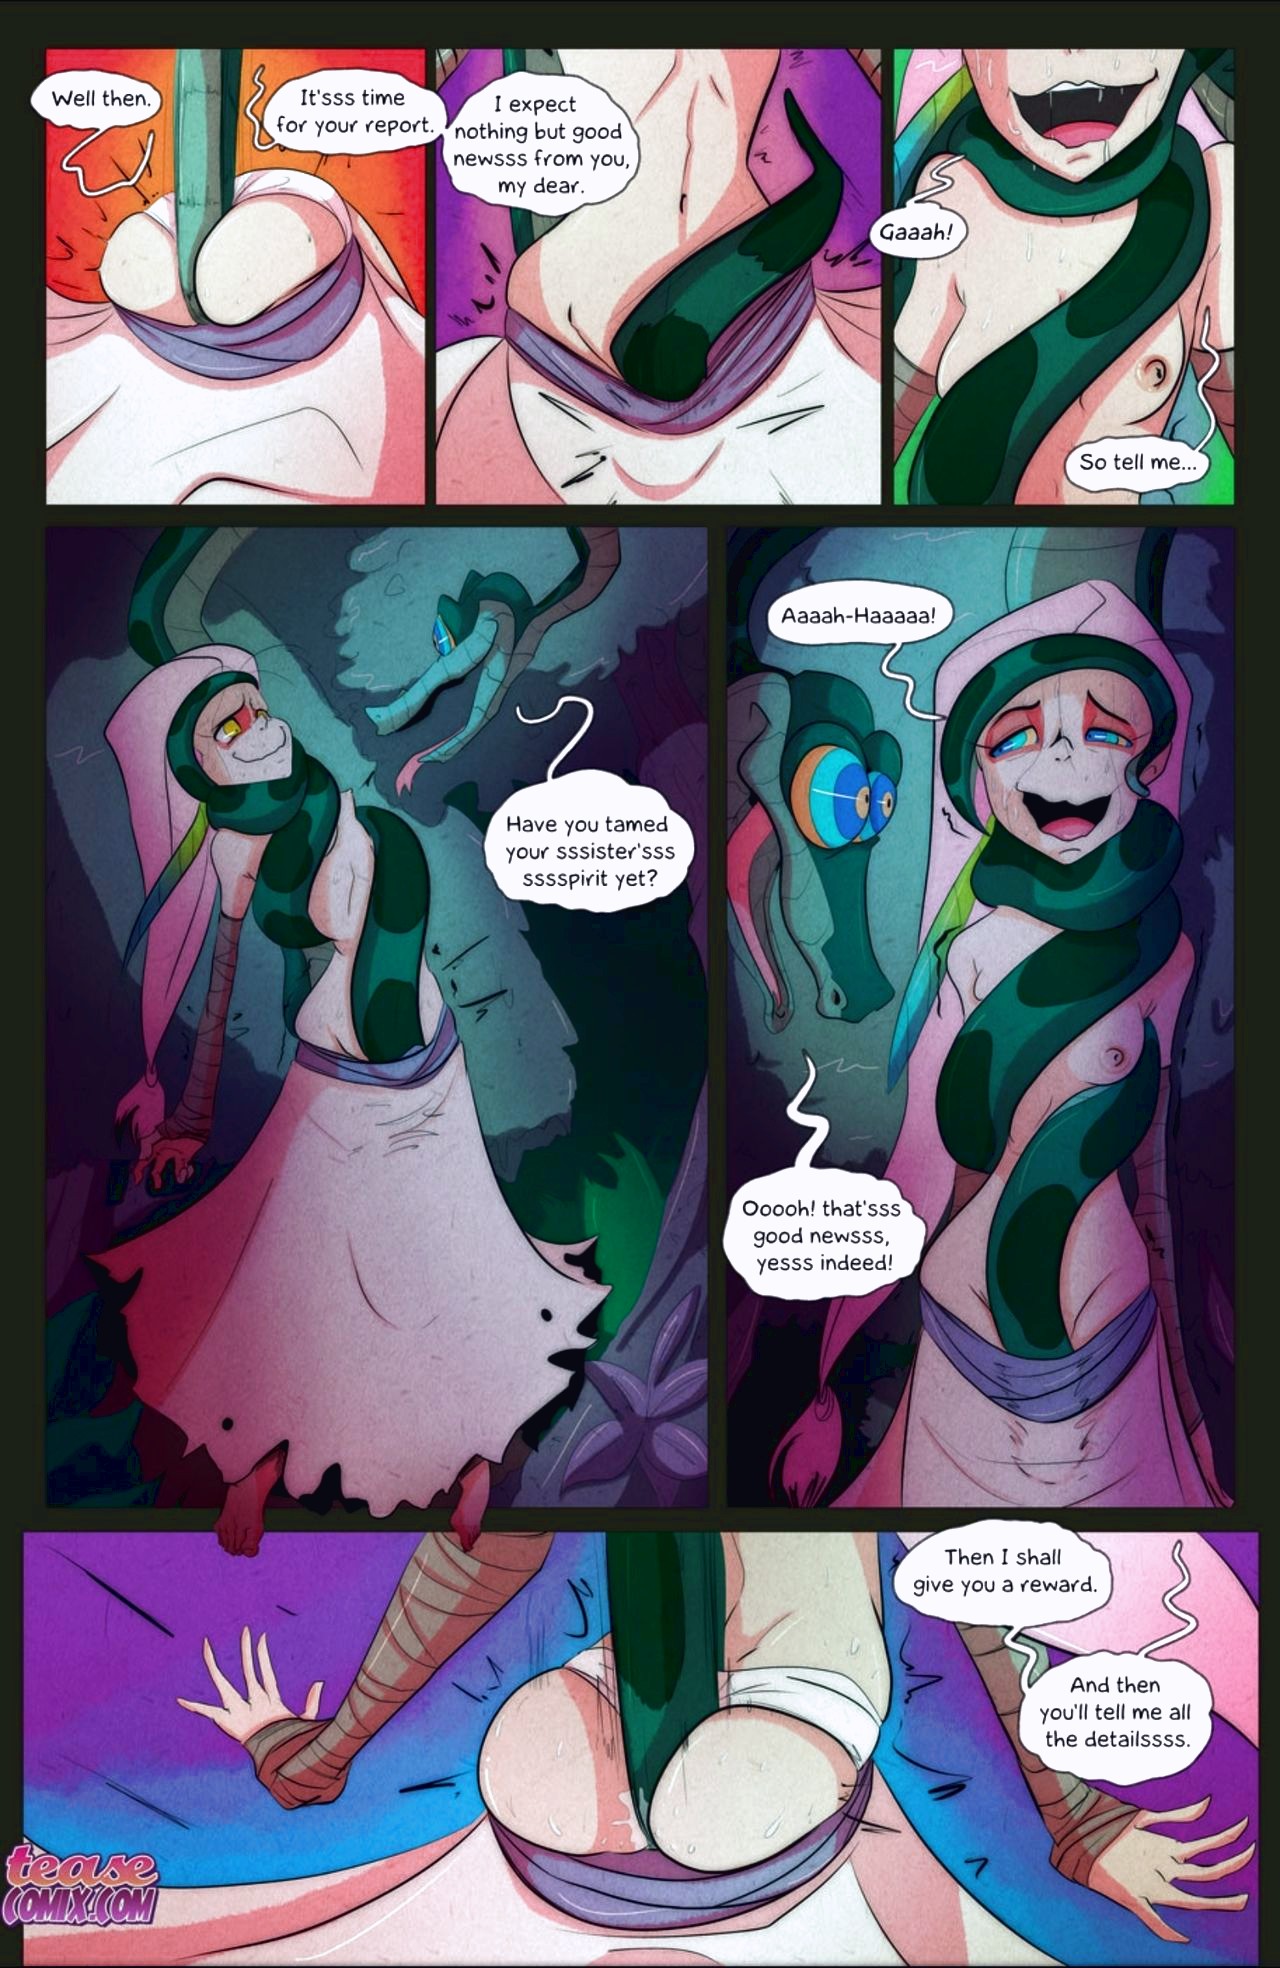 The Snake and The Girl 4 page 05